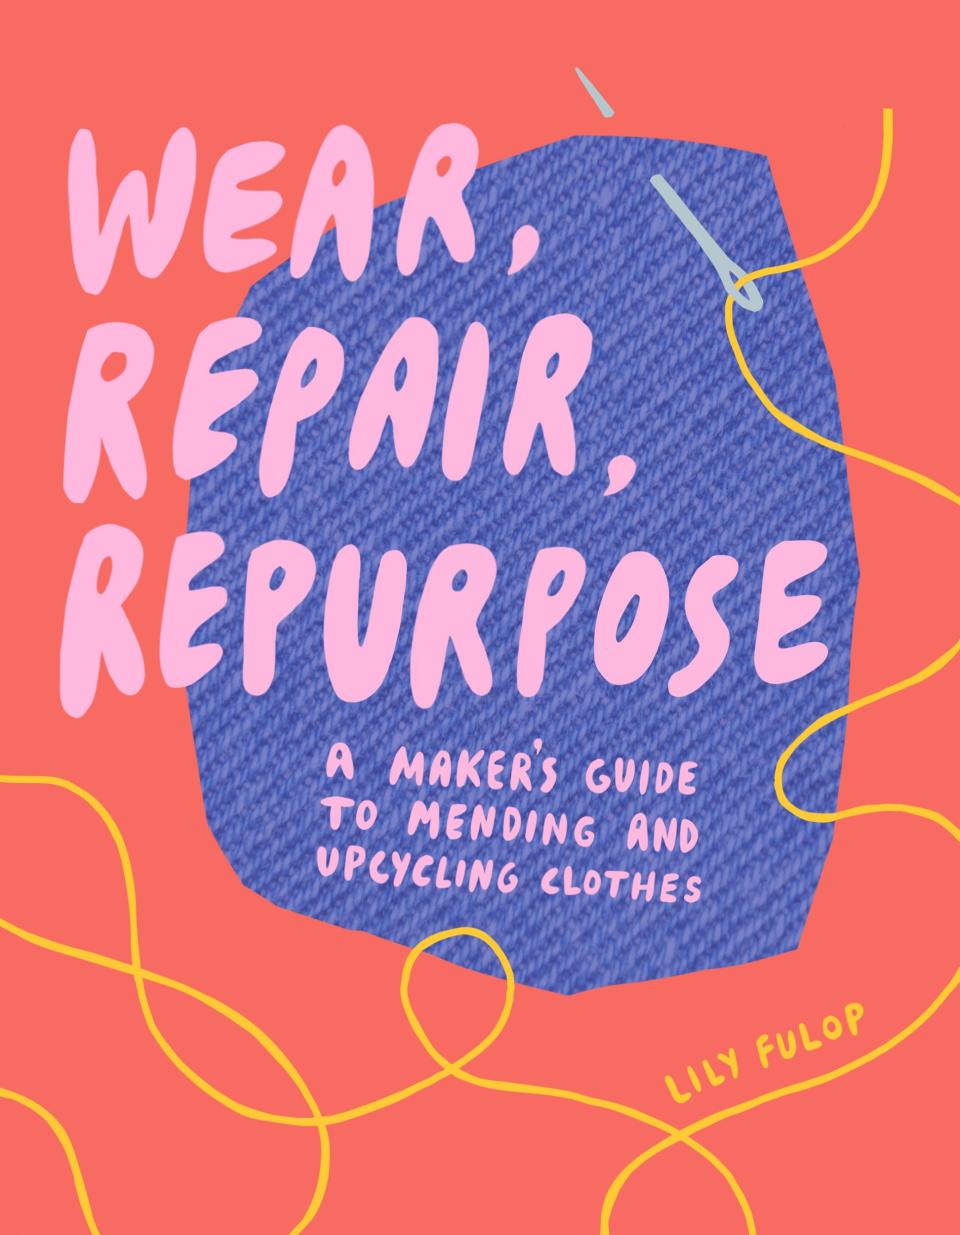 Wear, Repair, Repurpose: A Maker's Guide to Mending and Upcycling (Lily Fulop)